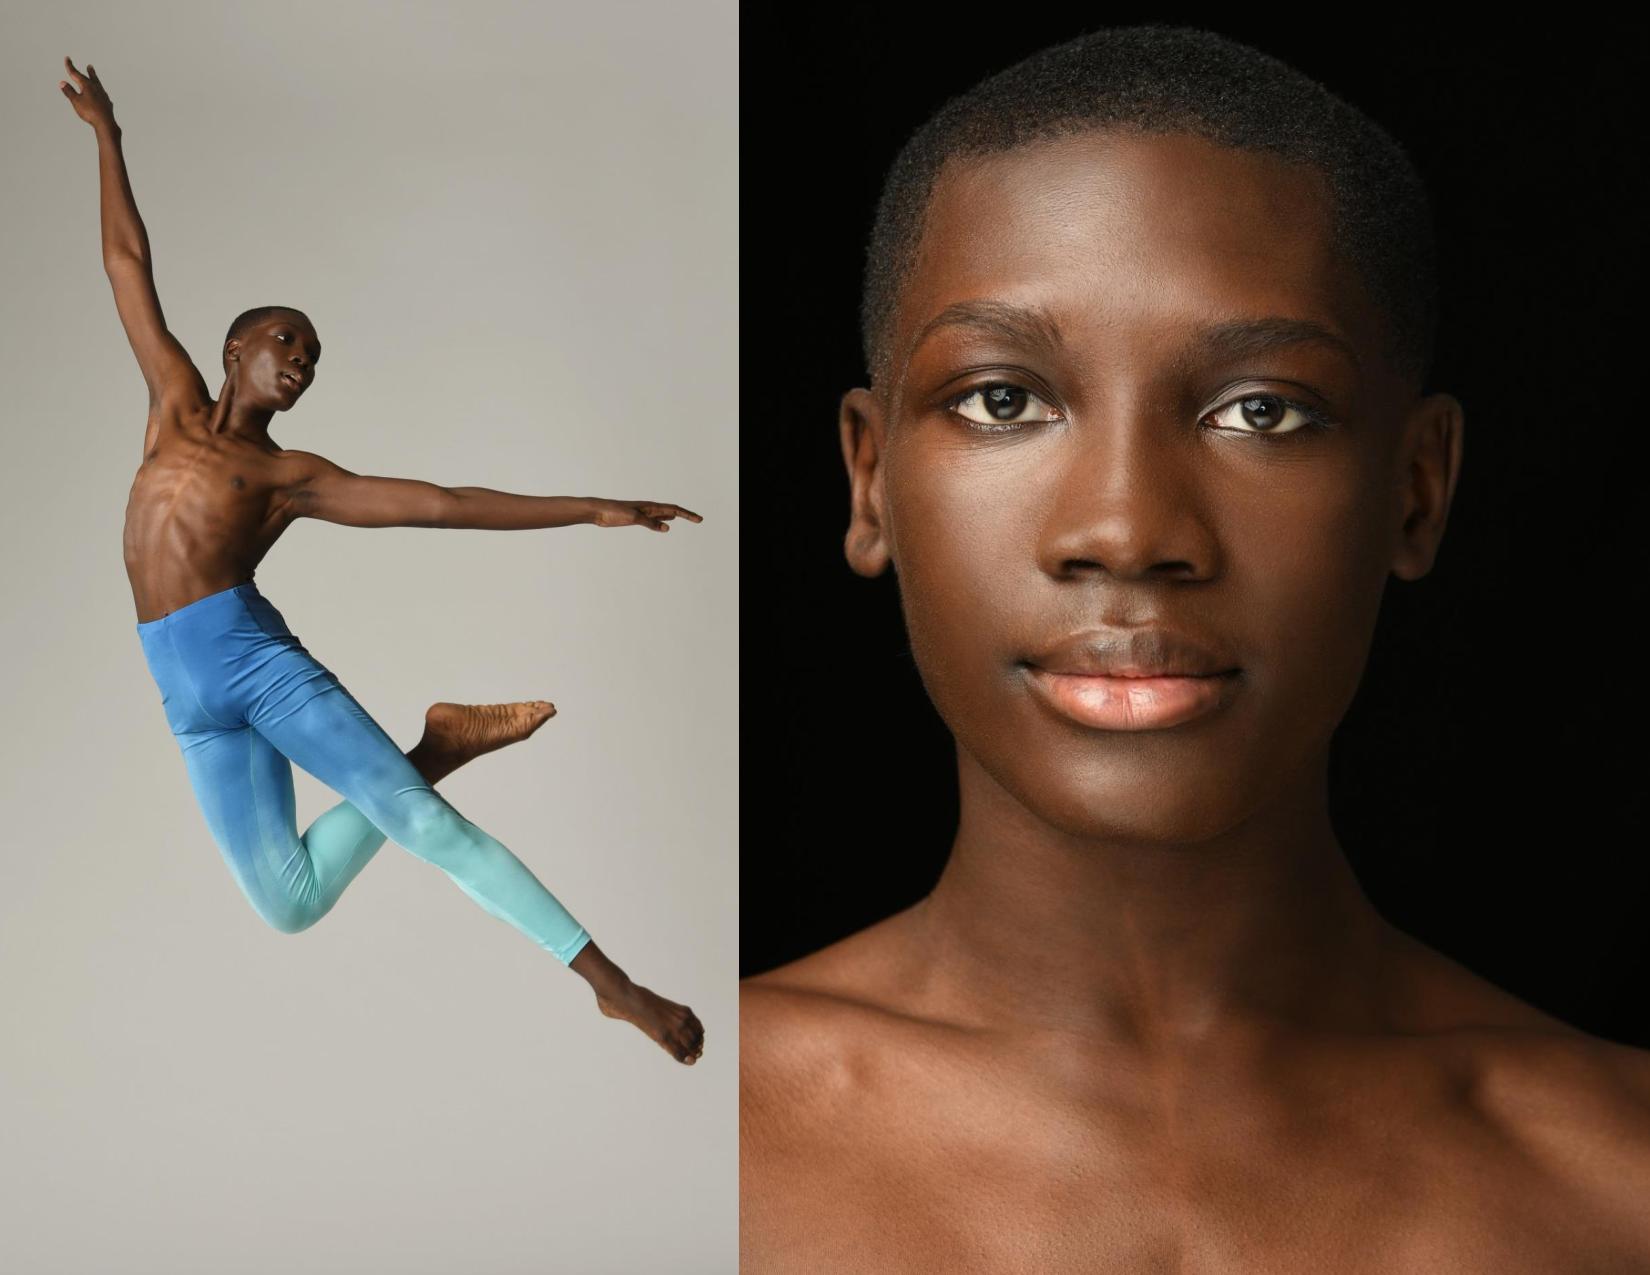   Babou Senneh ‘18  The Ailey School  